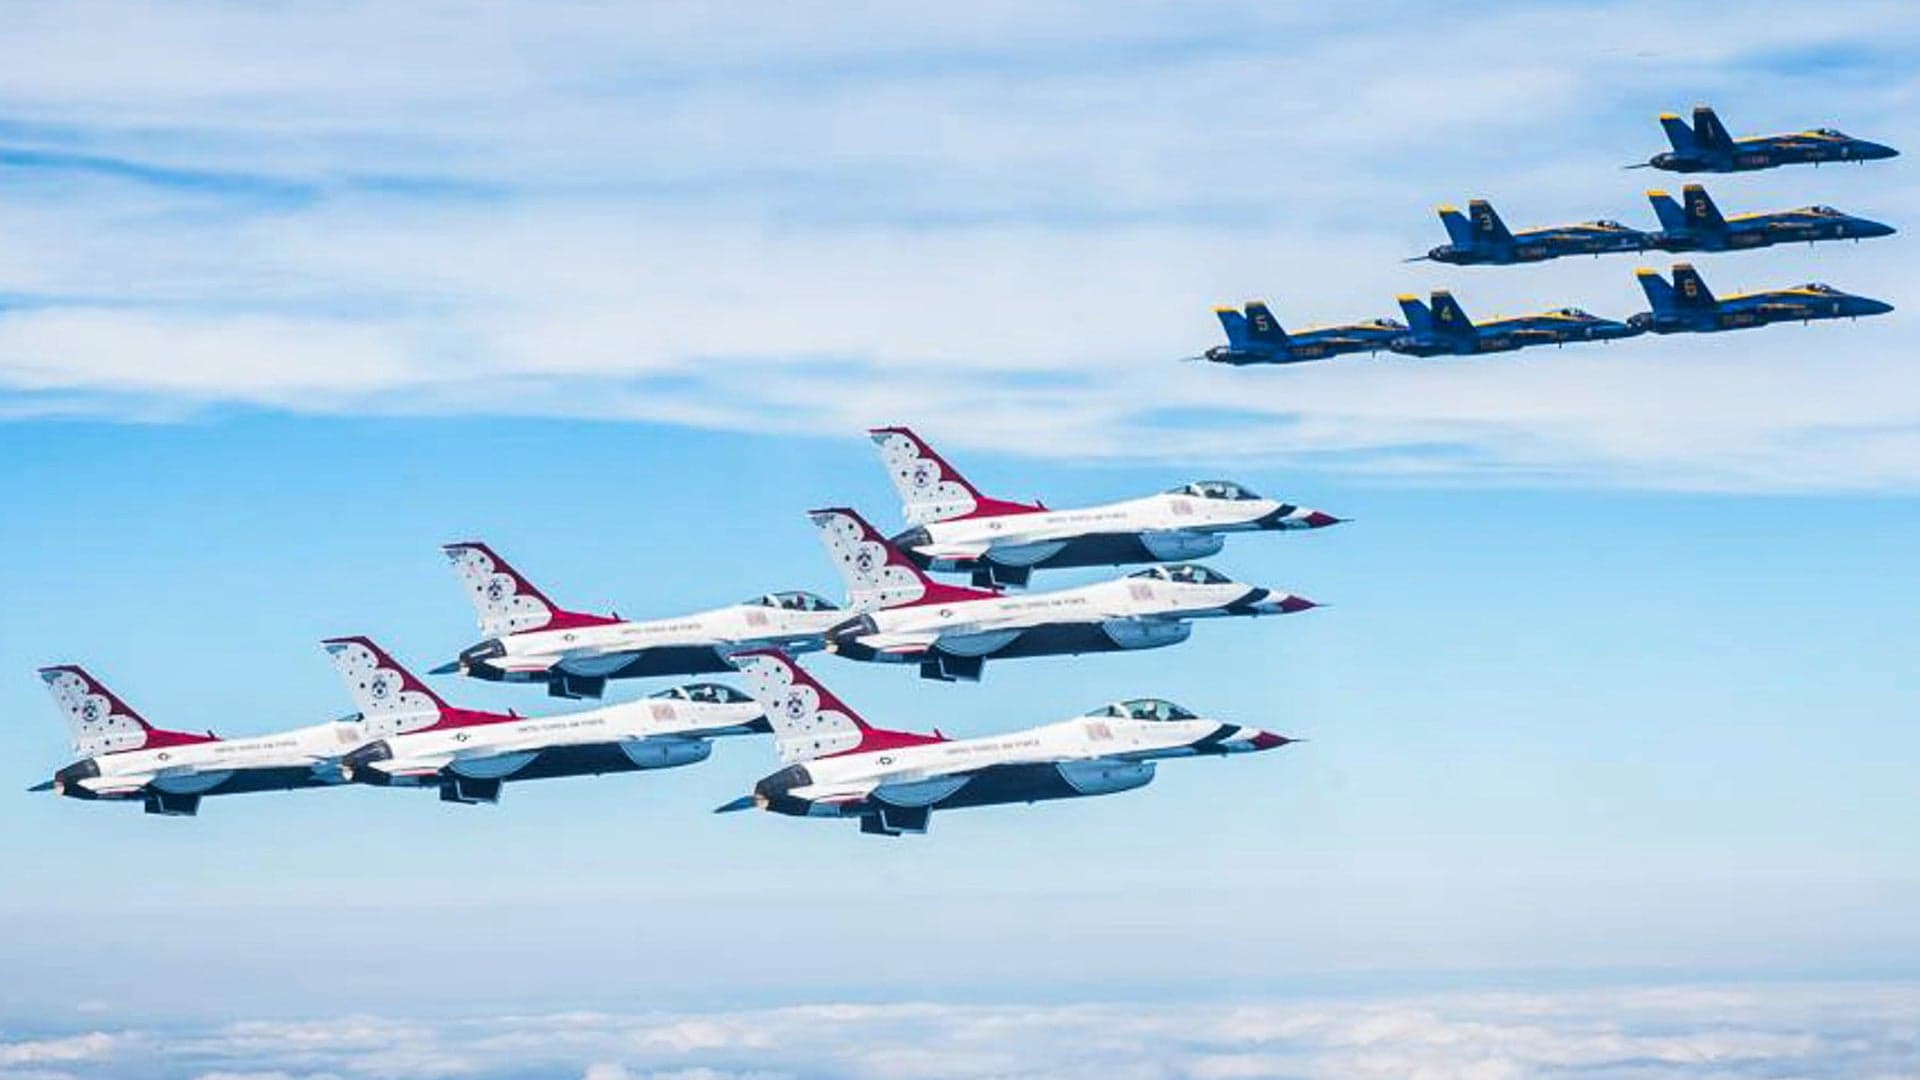 The Blue Angels And Thunderbirds Jet Teams Are Secretly Planning Something Big (Updated)